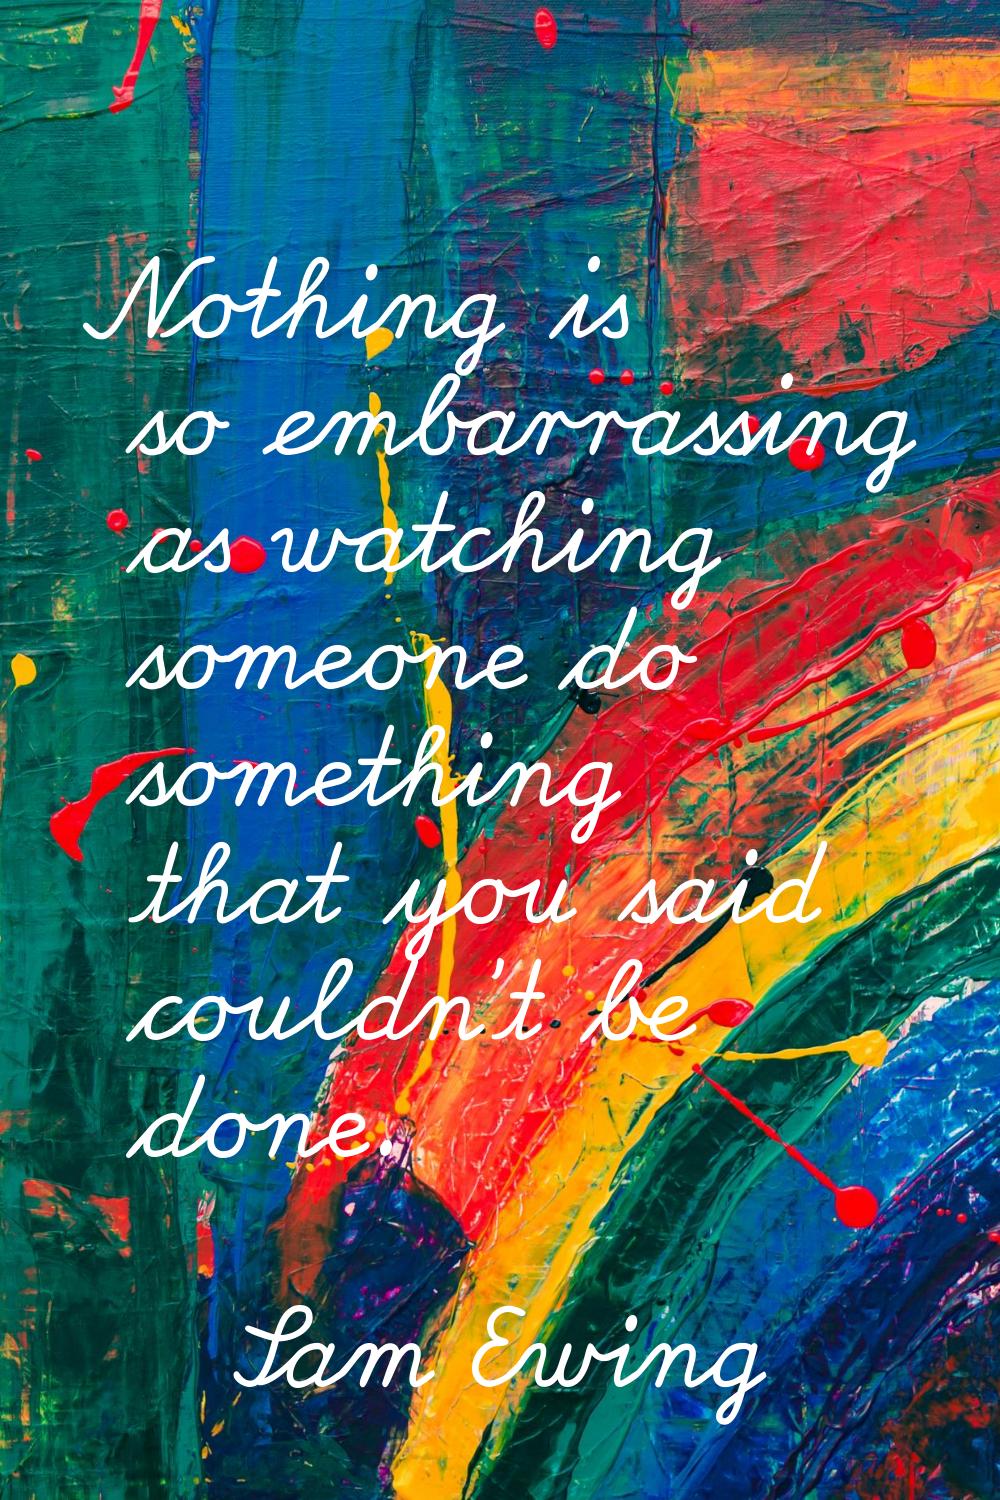 Nothing is so embarrassing as watching someone do something that you said couldn't be done.